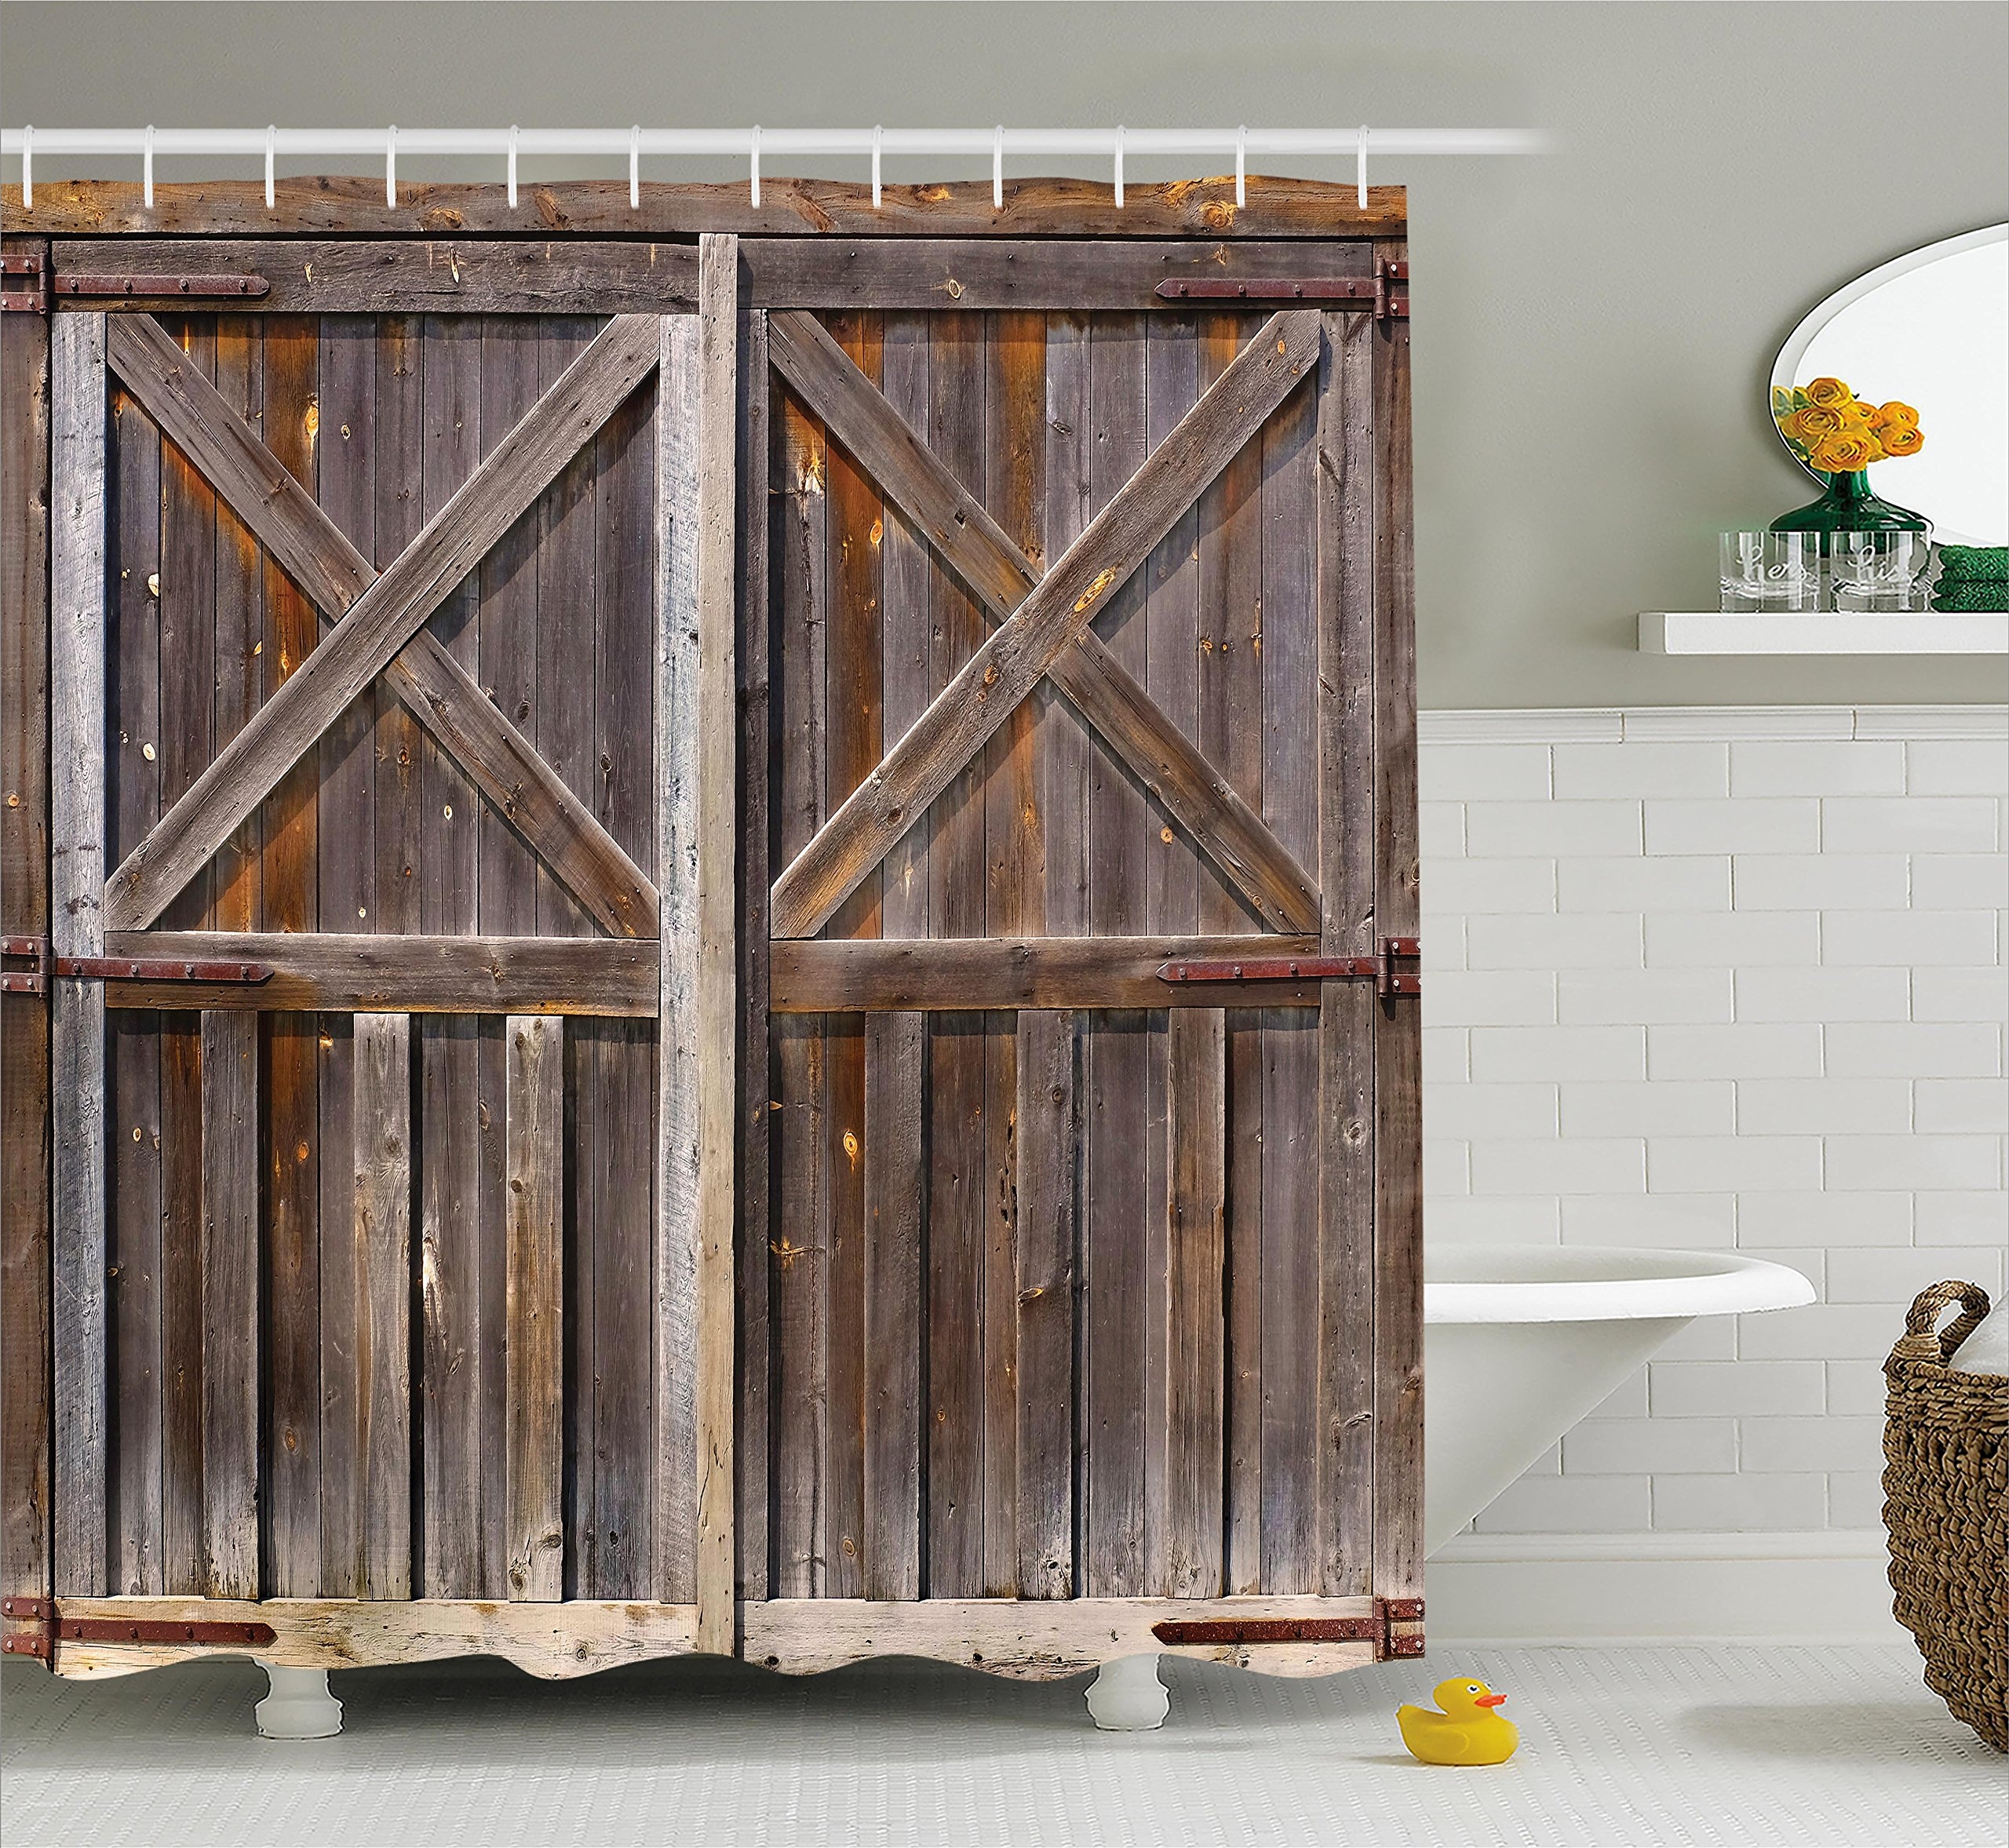 Farmhouse Wood Waterproof Polyester Fabric Western Country Barn Door for Rural Life Bath Curtain,69X70in MERCHR Rustic Shower Curtain Vintage Teal Grey Striped Wooden Plank for Bathroom Decor 